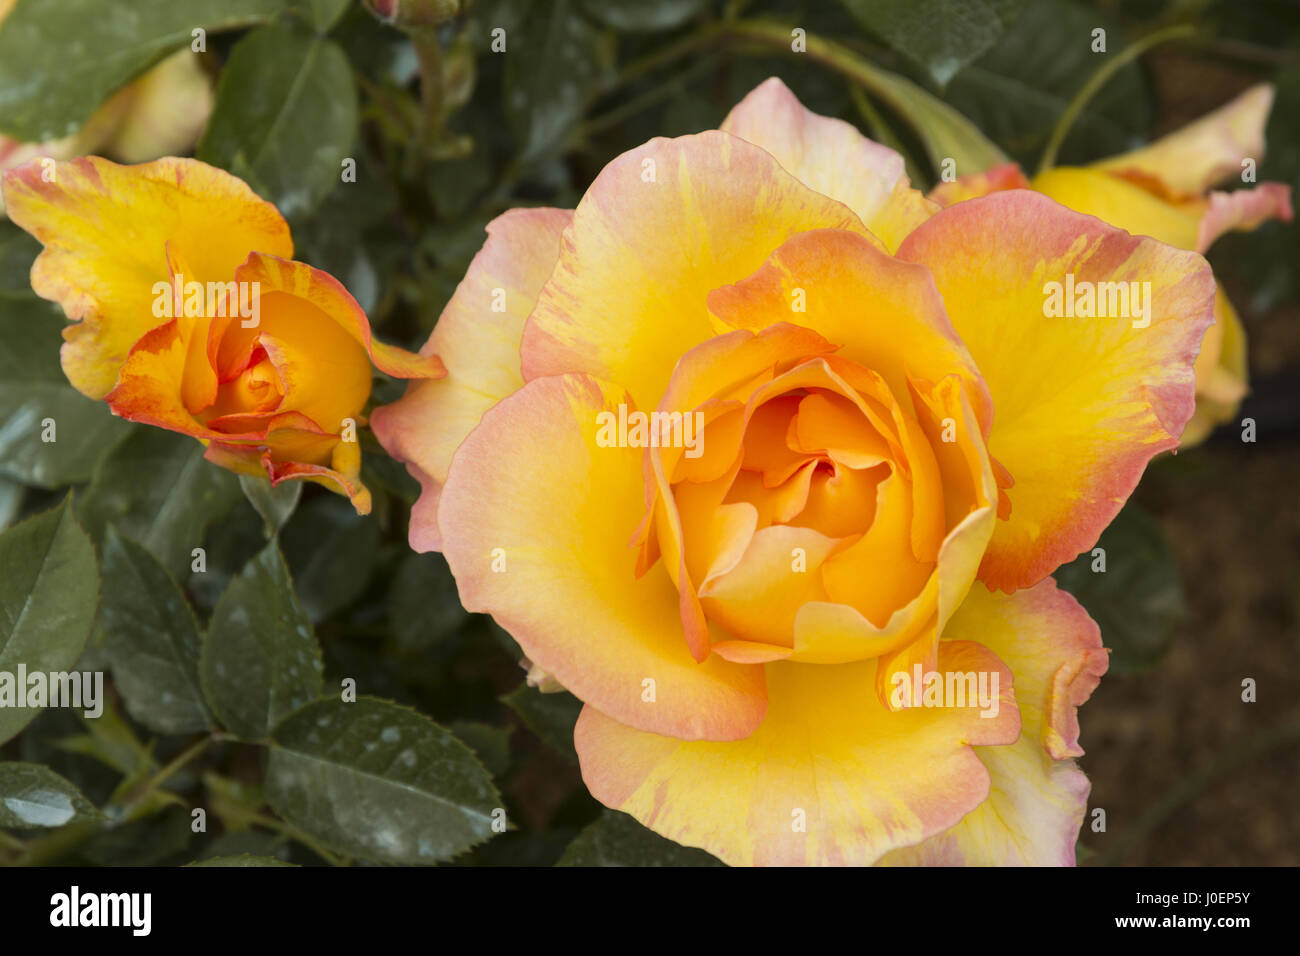 Frankreich, Narbonne, Fontfroide Abbey, Rosengarten, gelbe rose mit rosa highlights Stockfoto